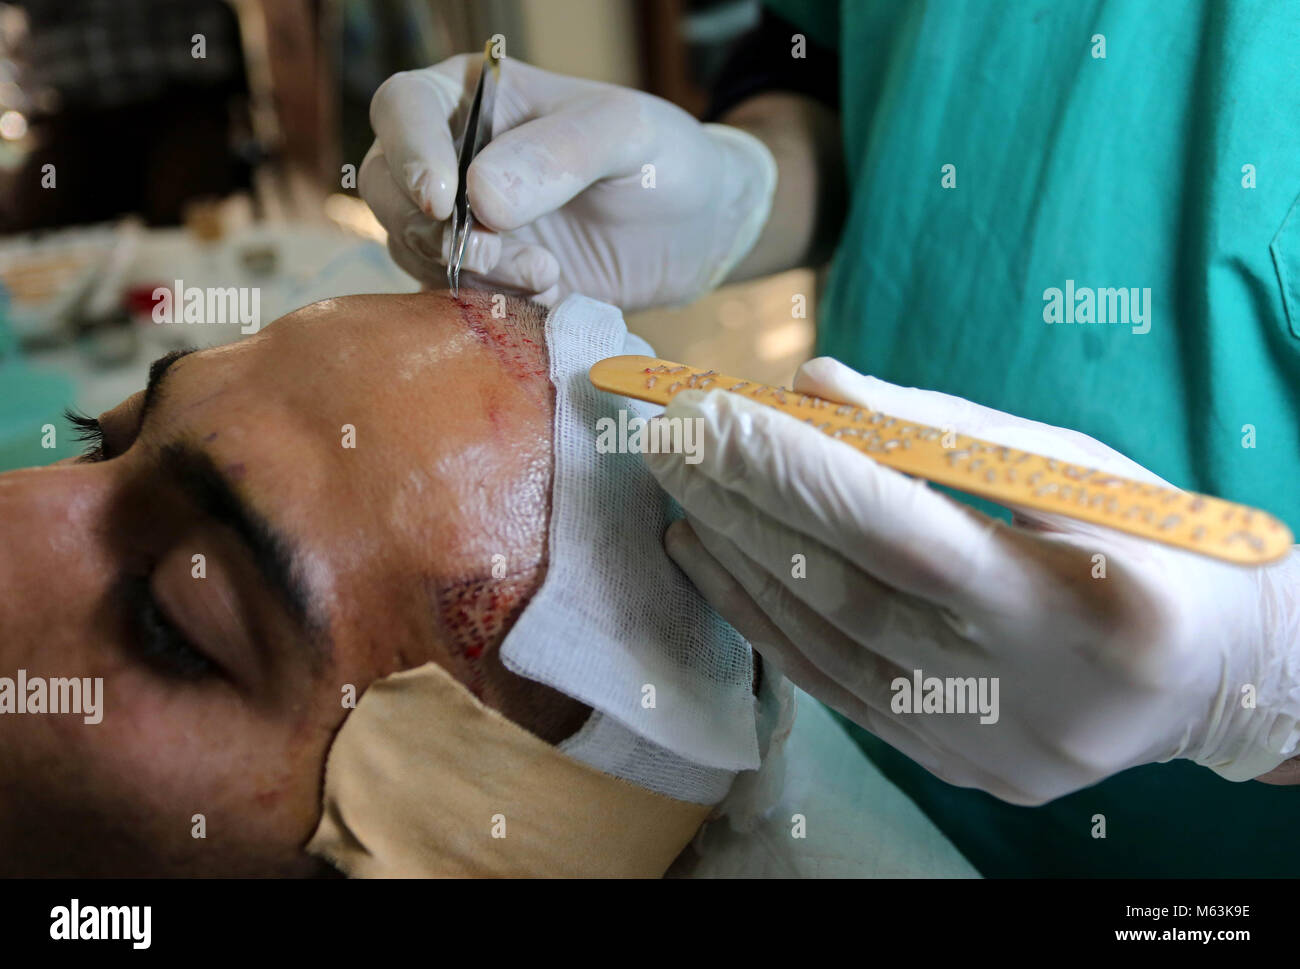 February 28, 2018 - Gaza City, Gaza Strip, Palestinian Territory - A Palestinian doctor Ahmed al-Moghrabi operates on a patient who undergo to Hair transplant surgery at his clinic, in Gaza city on February 28, 2018. Al-Moghrabi opened his clinic last year which is the first of its kind in the Gaza Strip, after years of studying in india and london and came with newest technologies to treat baldness. According to al-Moghrabi he performed about 15 surgery since he opened his clinic each one take from 5 to 10 hours with success rate of 100%, and the surgery cost from 1000 to 1500 $ but economic Stock Photo